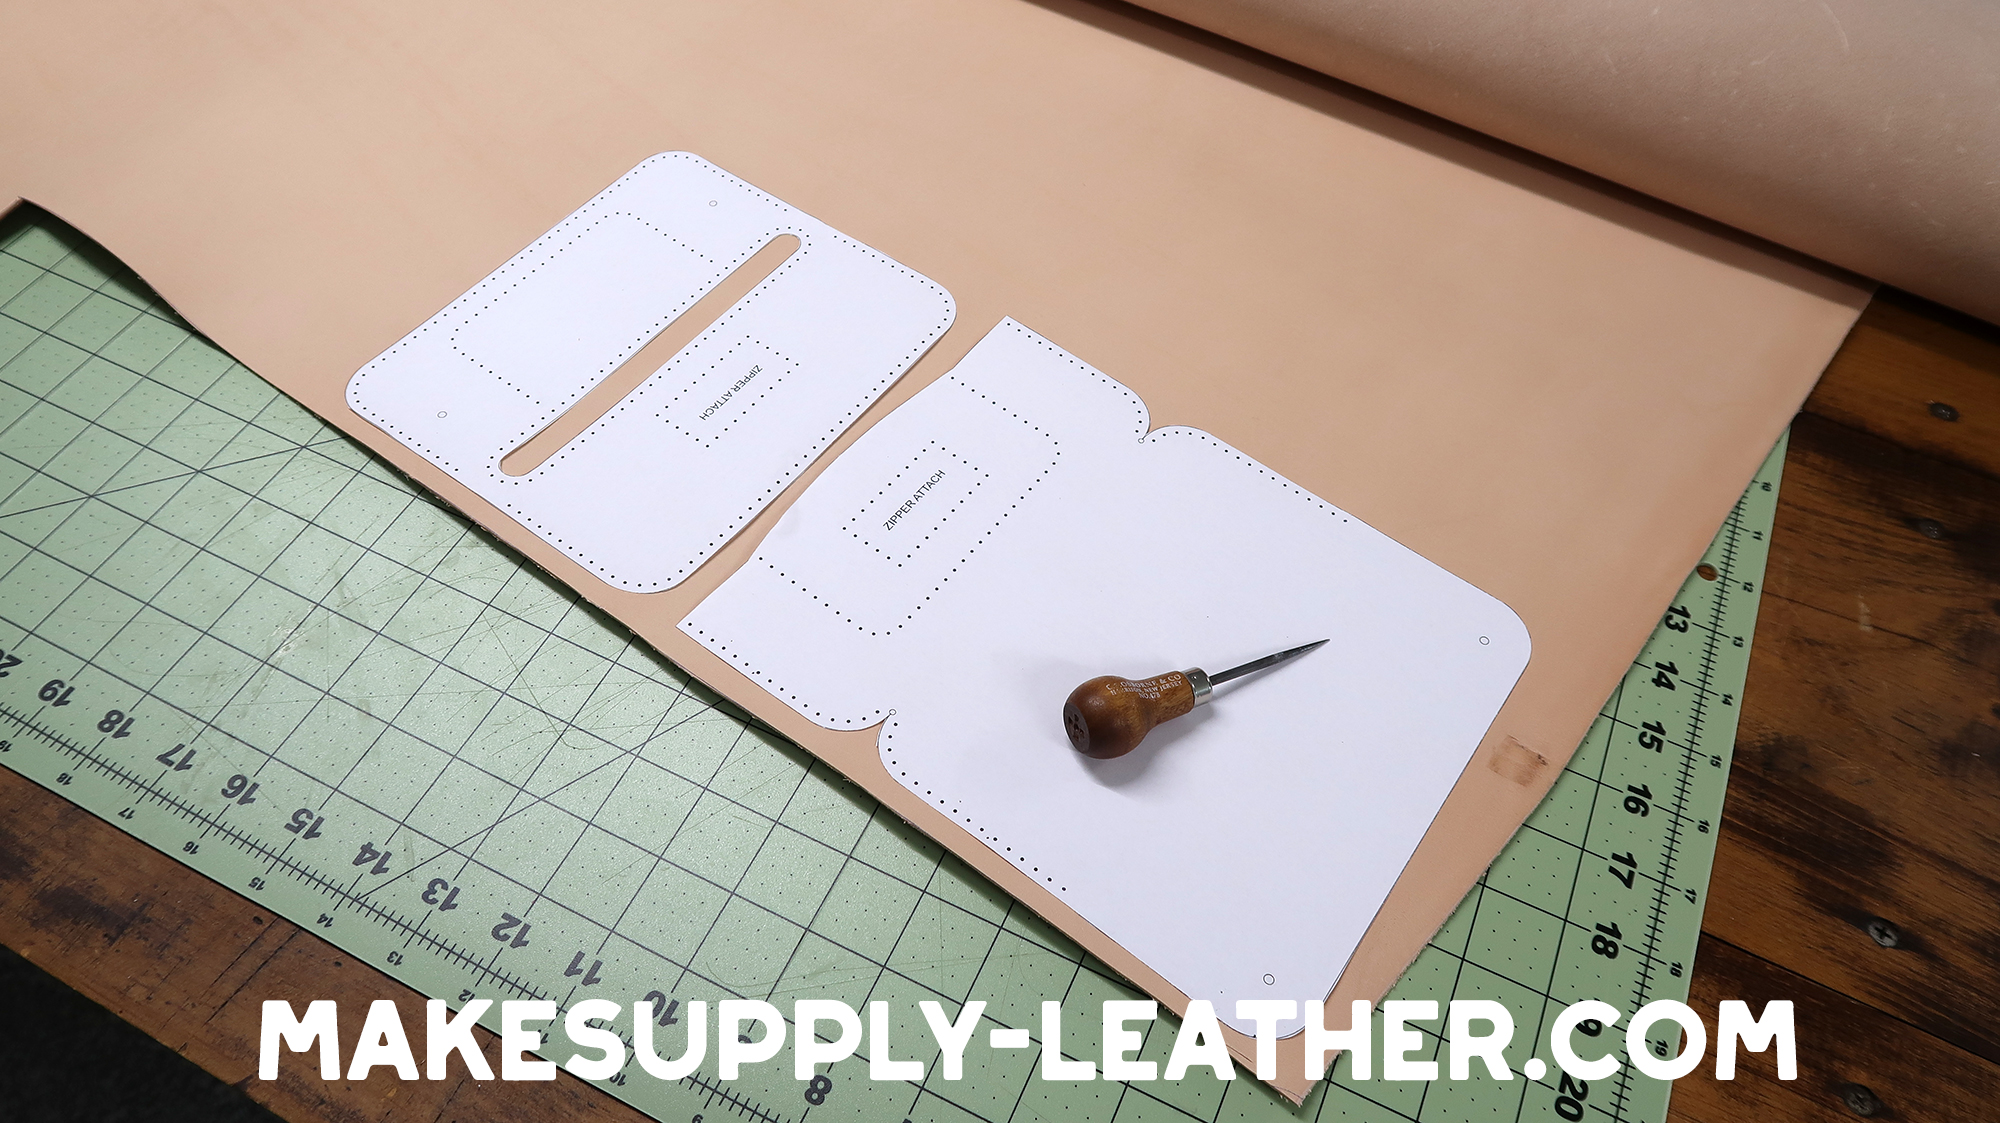 Templates - Page 3 of 6 - MAKESUPPLY